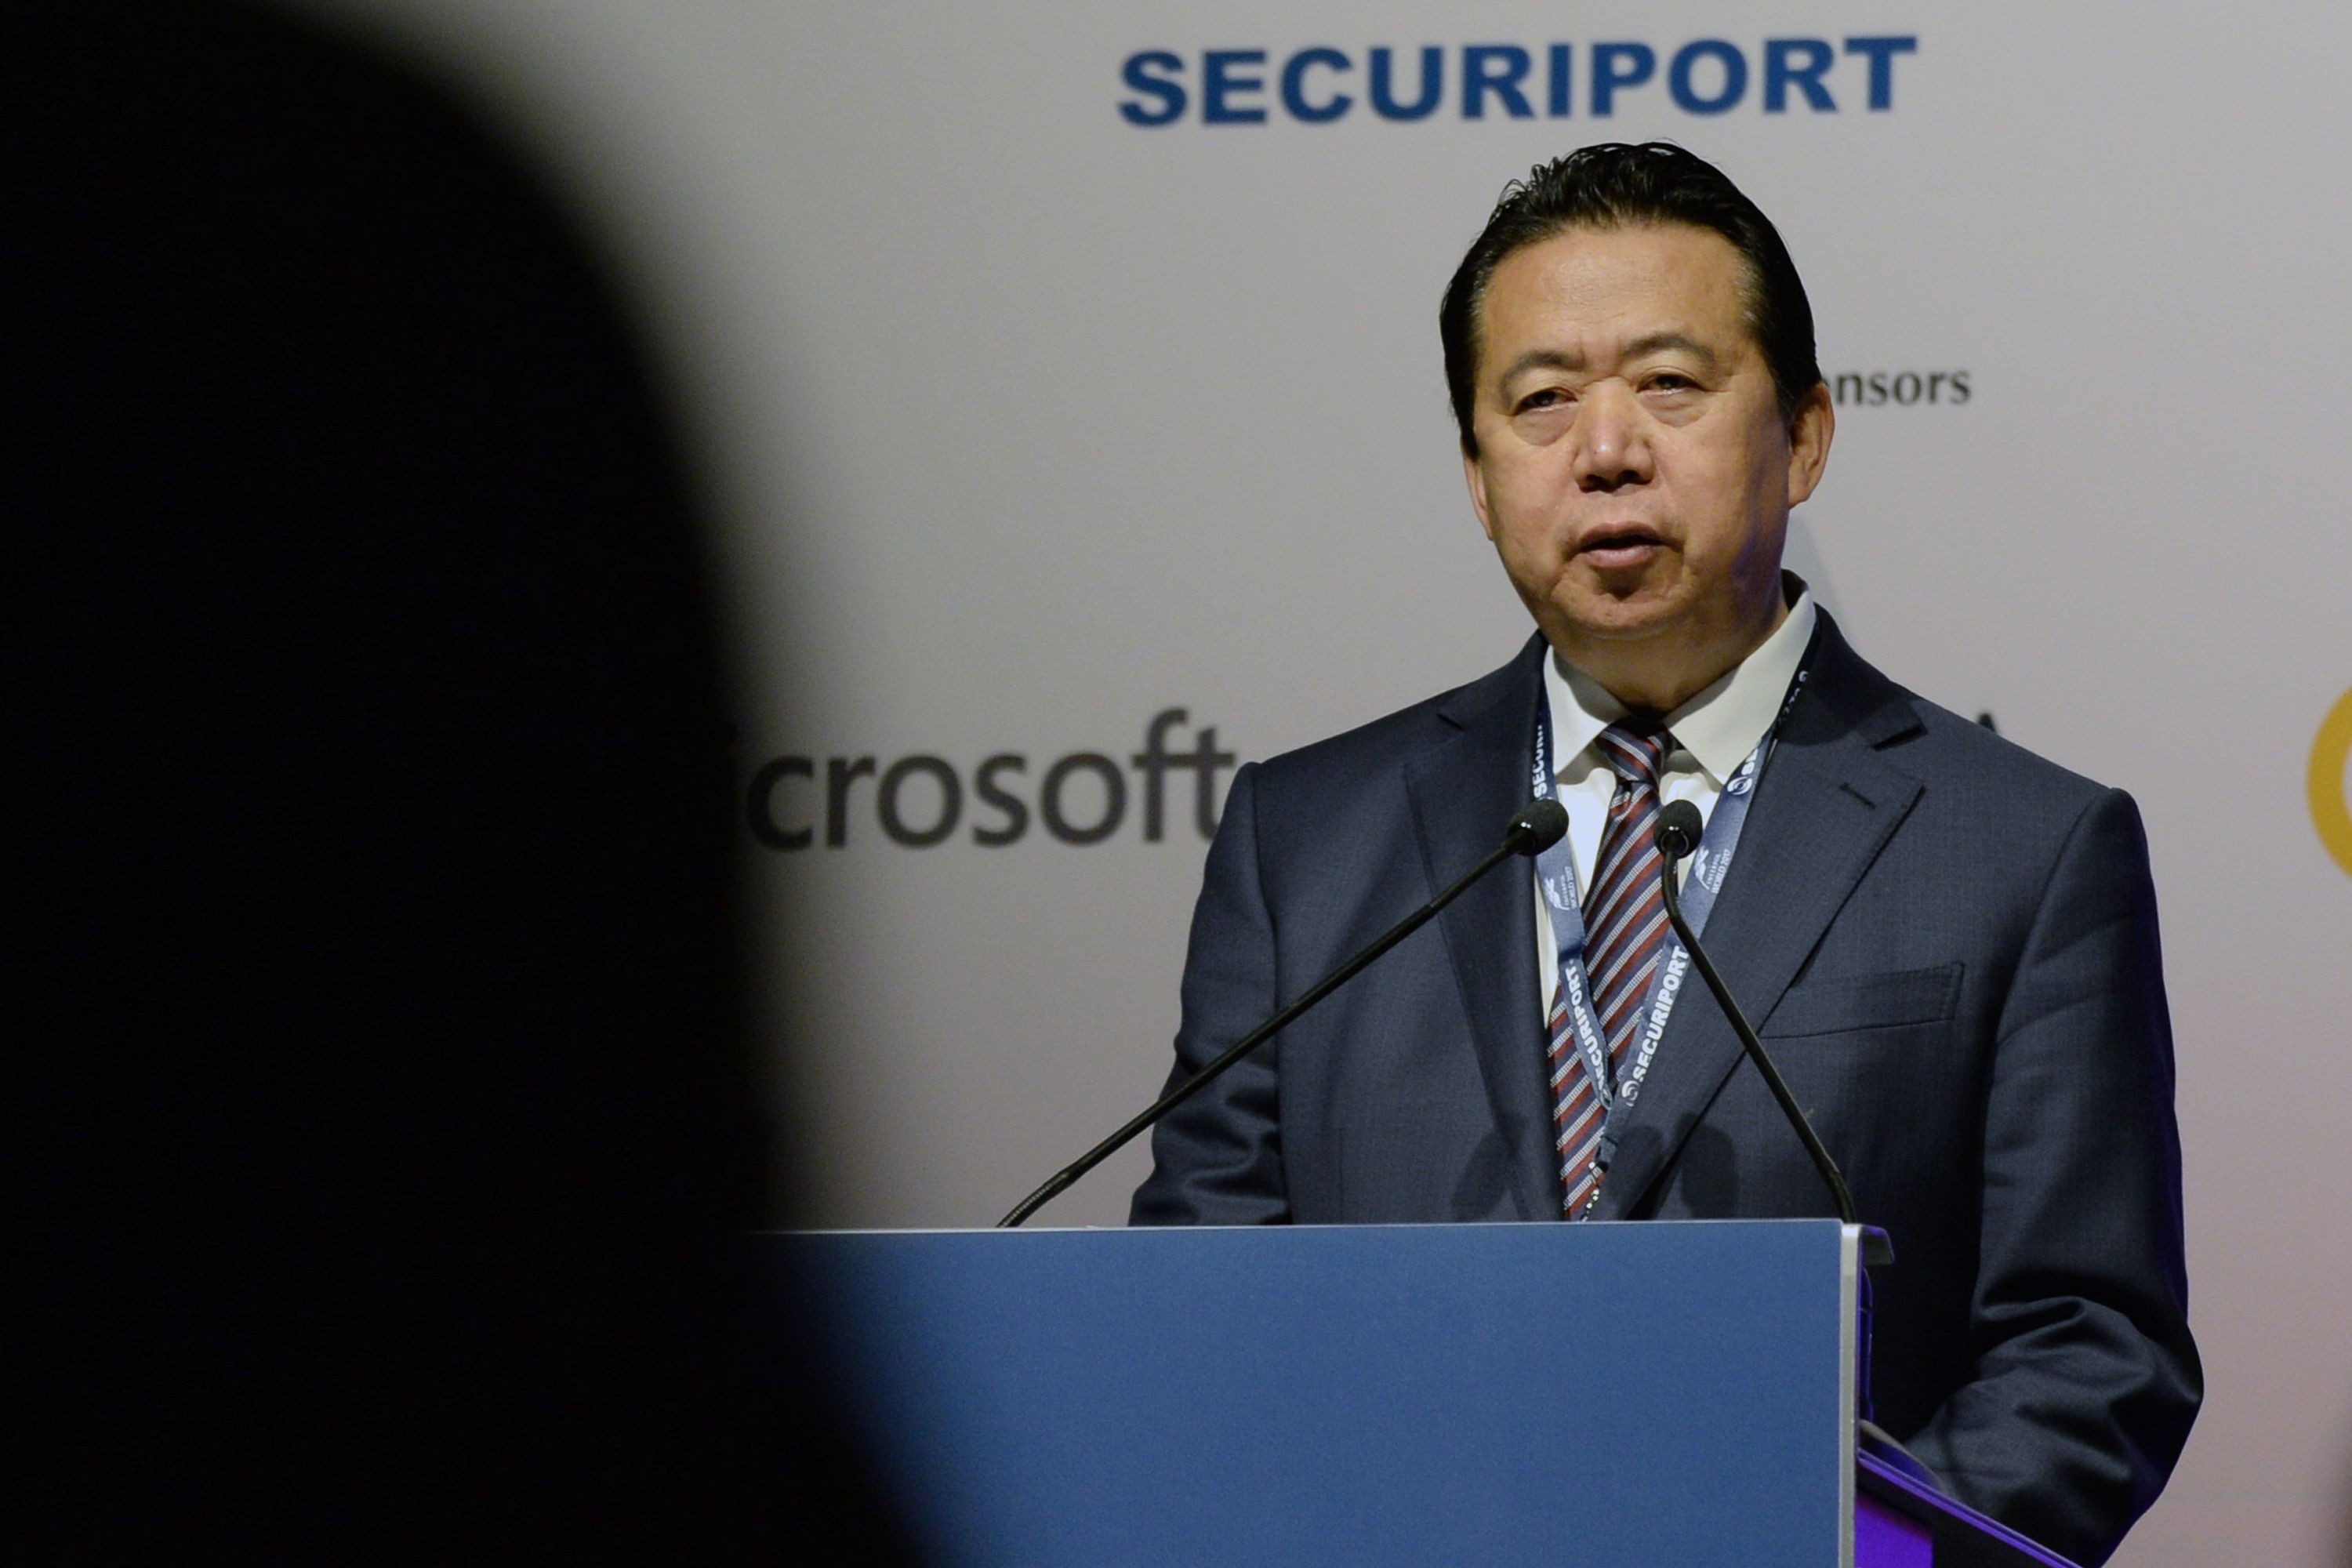 Meng Hongwei’s detention comes at a cost to the confidence of international partners. Photo: AFP